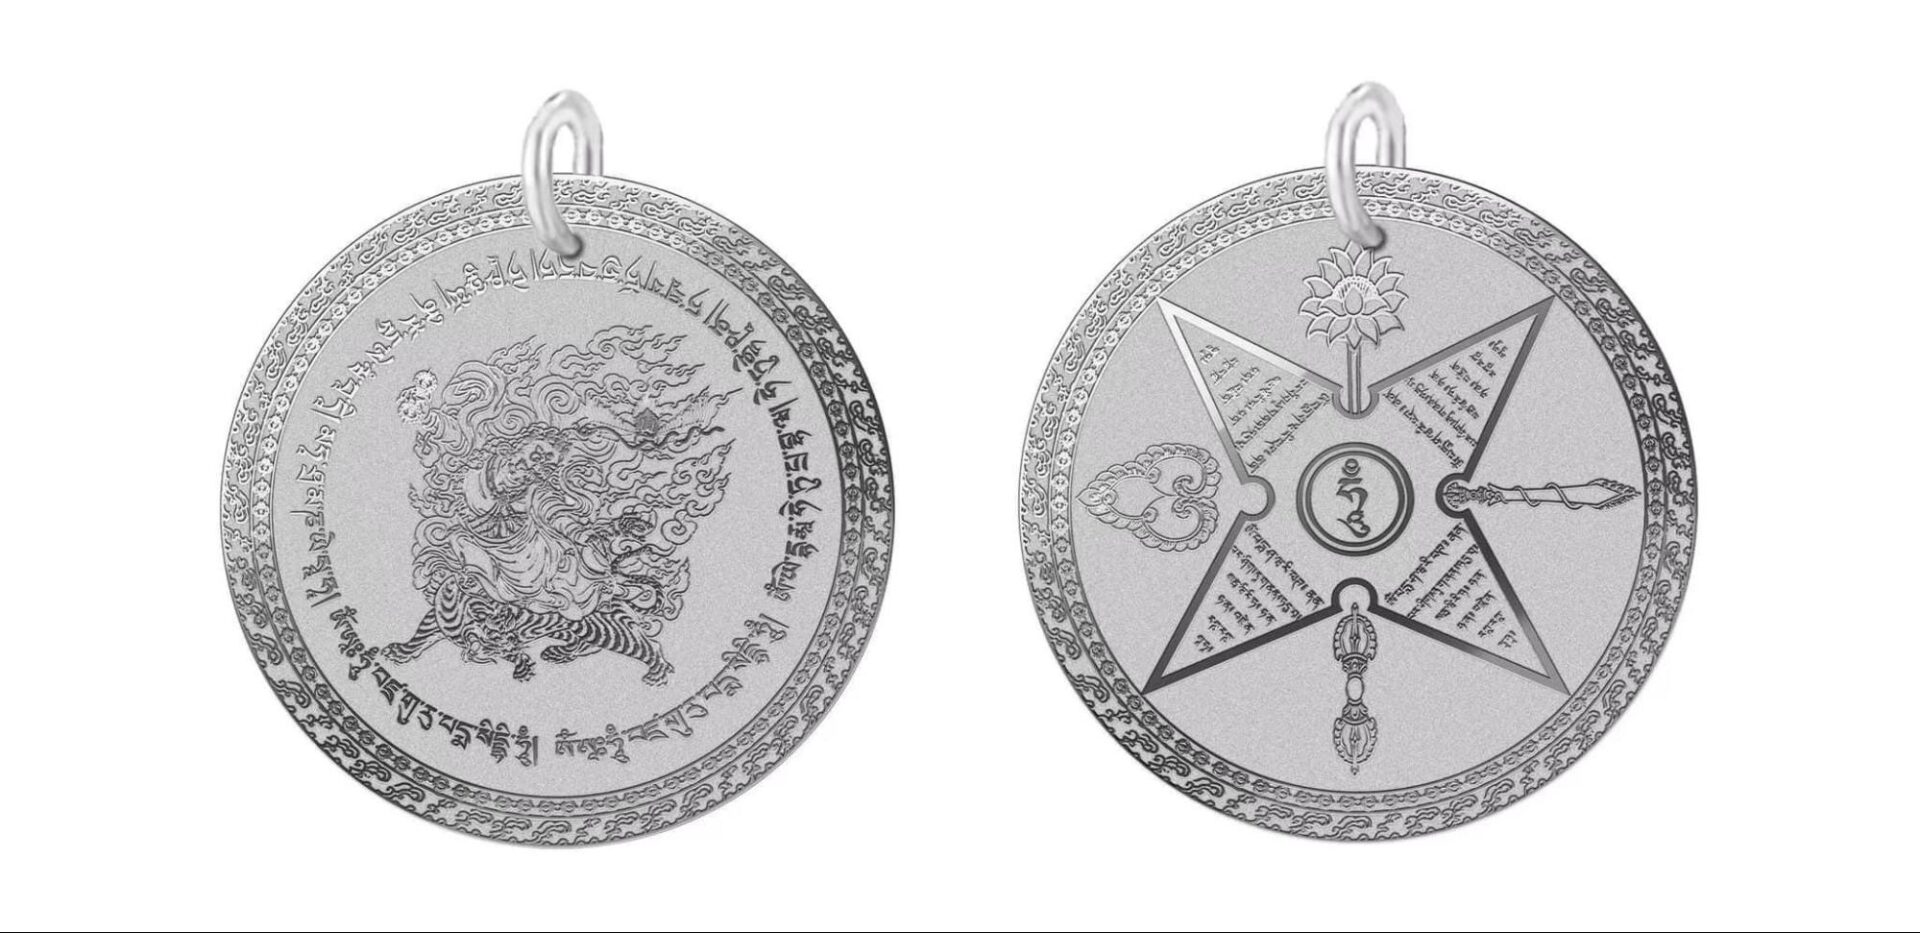 Two silver coins with designs on them with white background